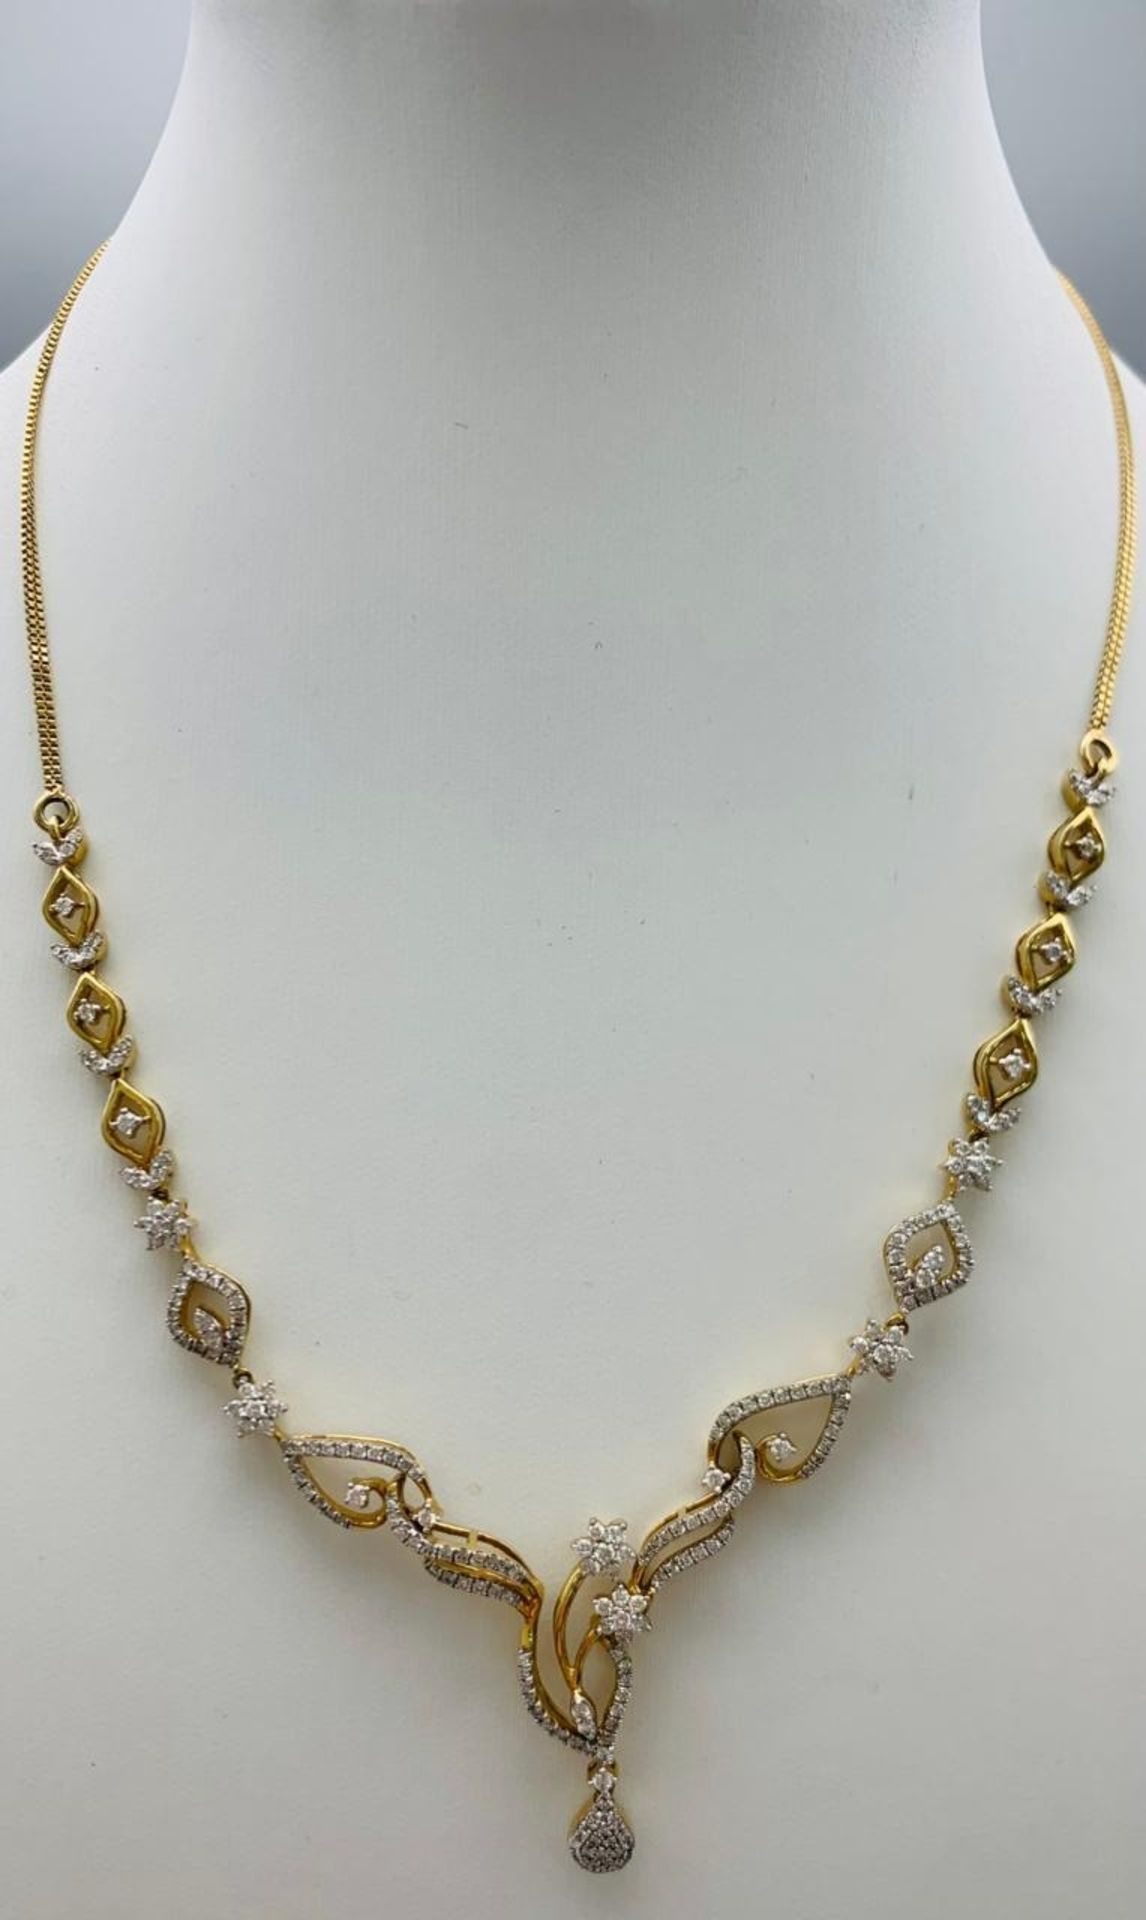 A very elegant 14 K yellow gold necklace with a beautiful design with diamonds (1.40 carats),